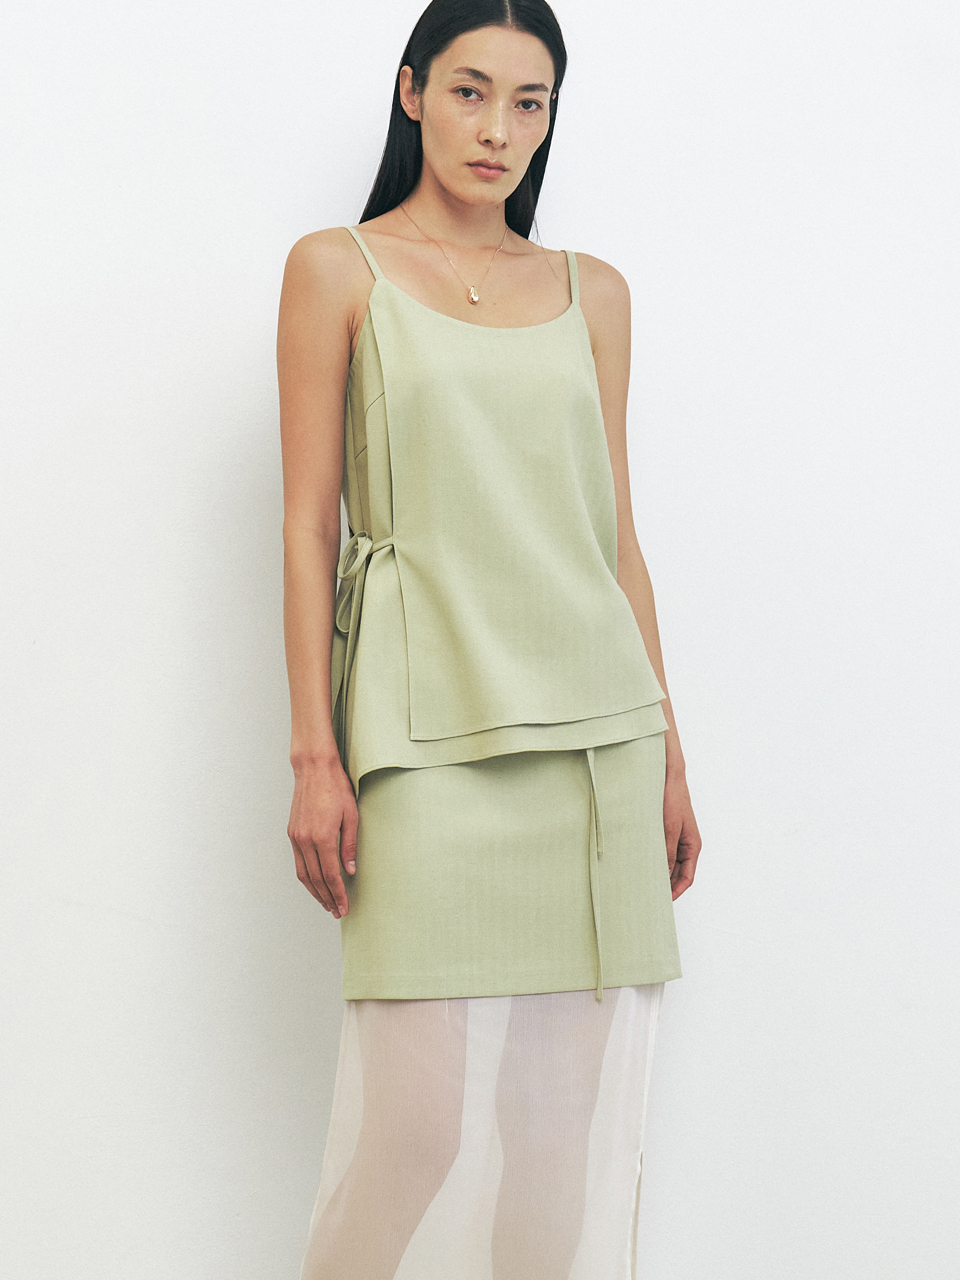 HACIE - LINEN BLENDED LAYERED SLEEVELESS TOP [3COLORS]